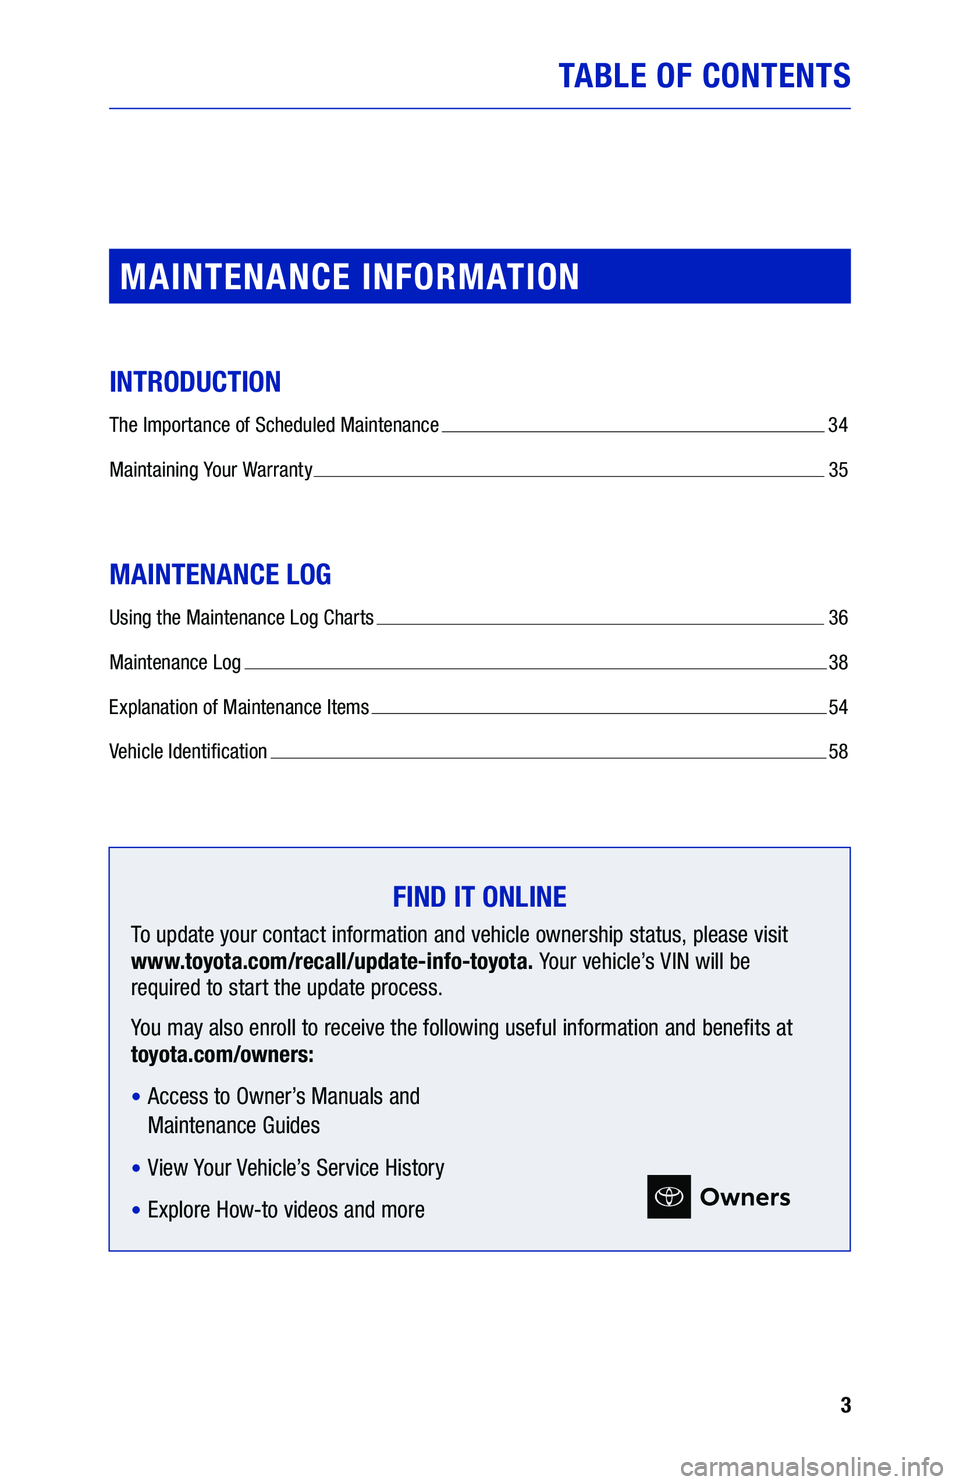 TOYOTA C-HR 2021  Warranties & Maintenance Guides (in English) 3
TABLE OF CONTENTS
MAINTENANCE INFORMATION
INTRODUCTION
The Importance of Scheduled Maintenance  34
Maintaining Your Warranty  35
MAINTENANCE LOG
Using the Maintenance Log Charts  36
Maintenance Log 